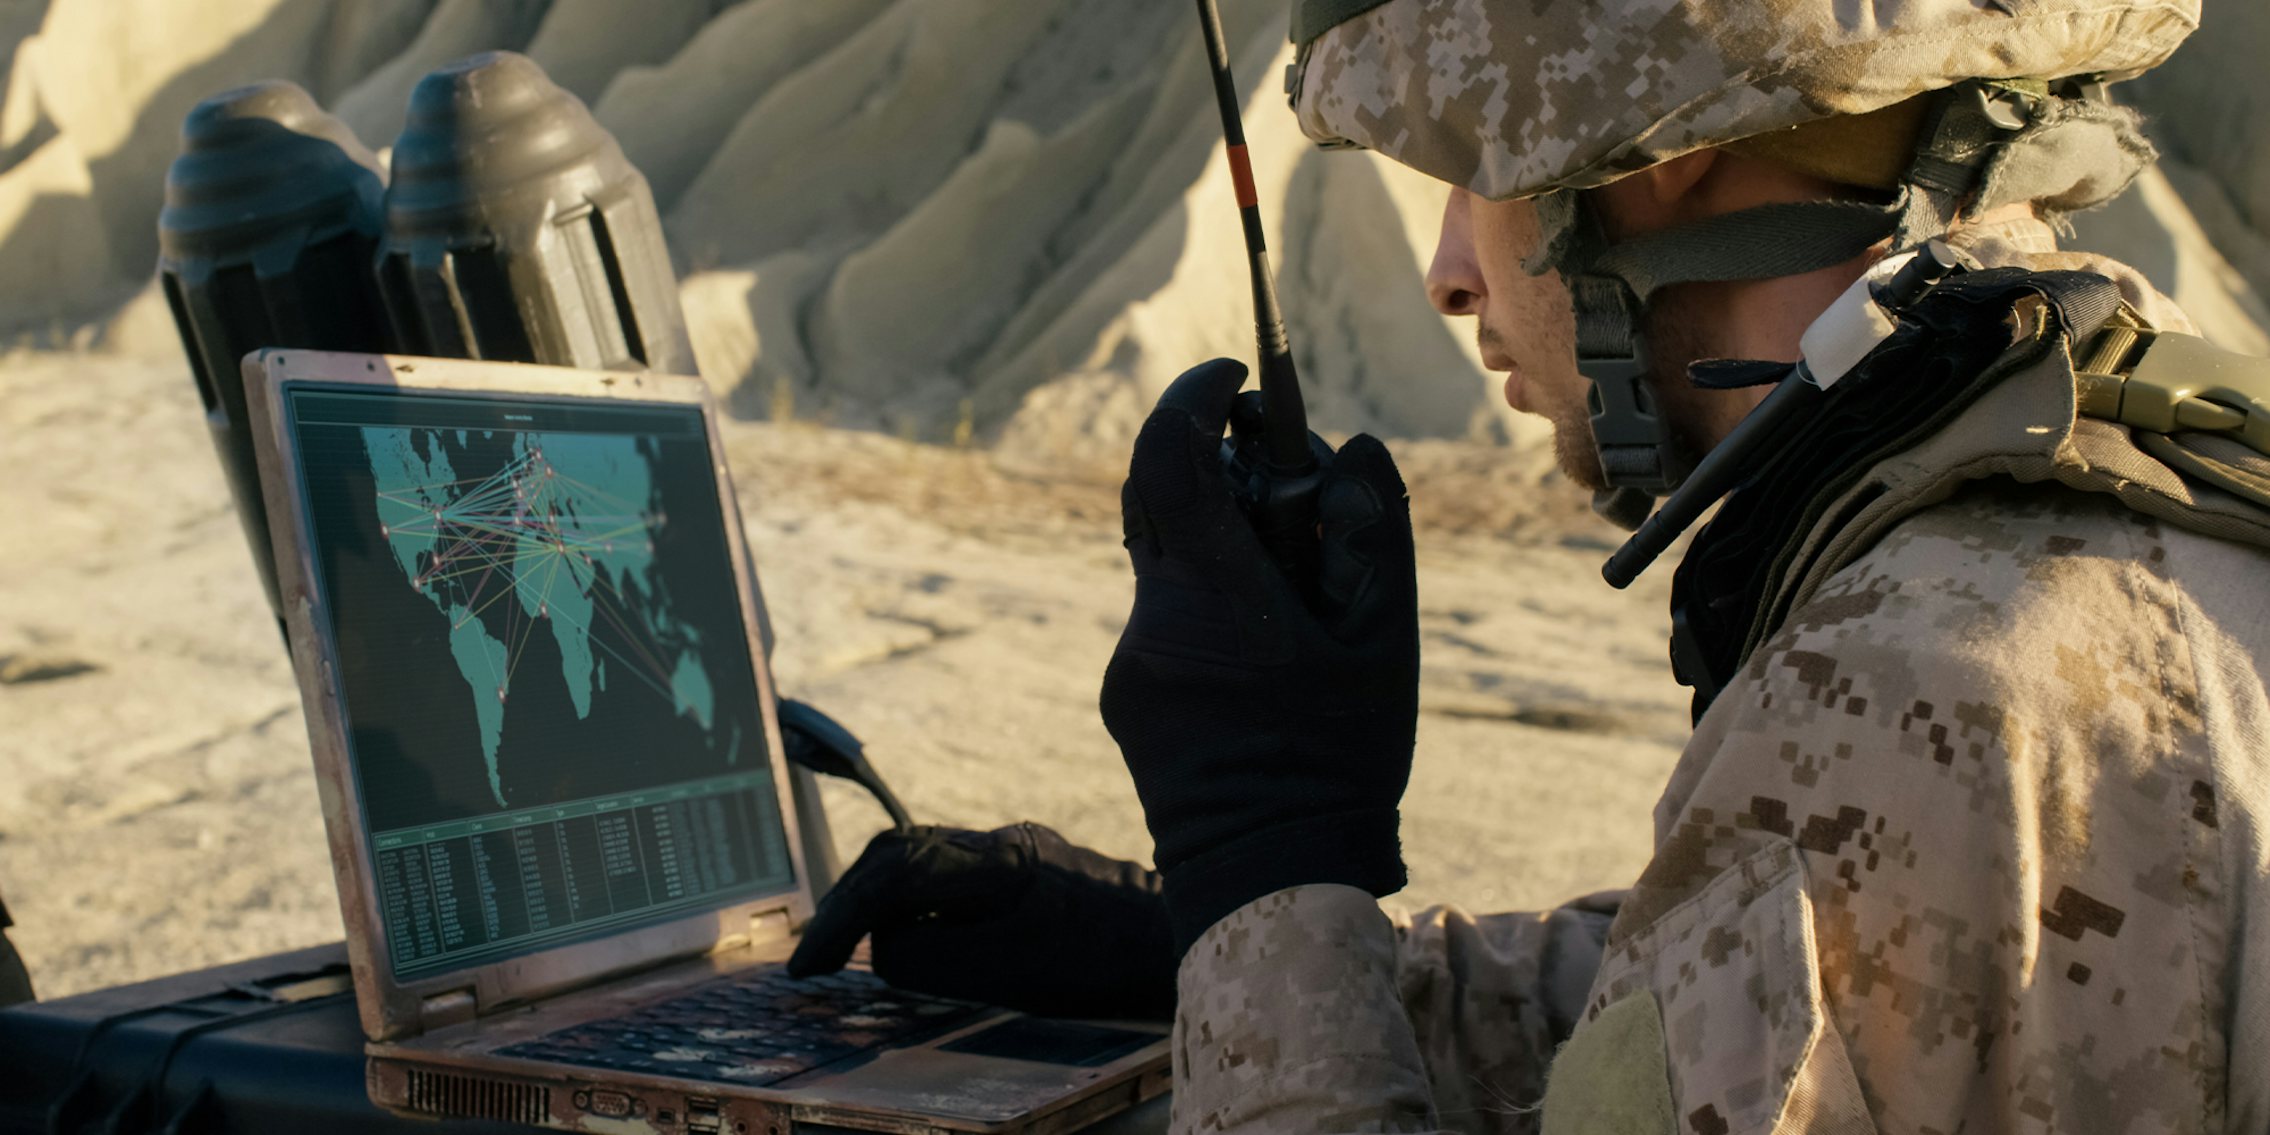 Soldier is Using Laptop Computer and Radio for Communication During Military Operation in the Desert.